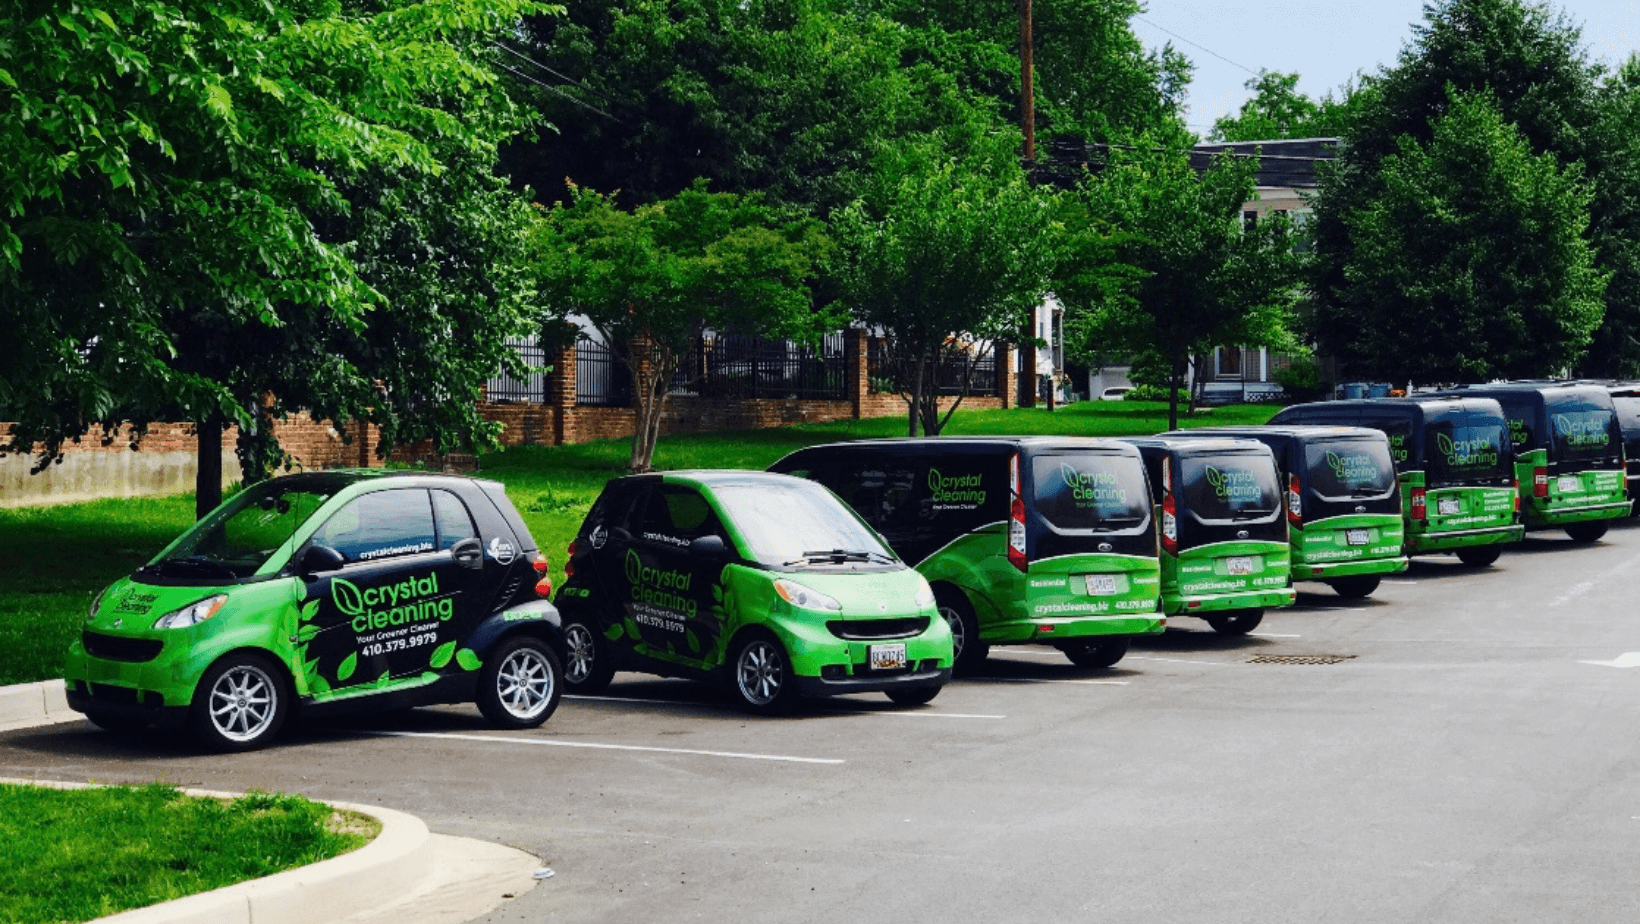 fleet-of-black-smart-cars-with-green-bumpers-and-lettering